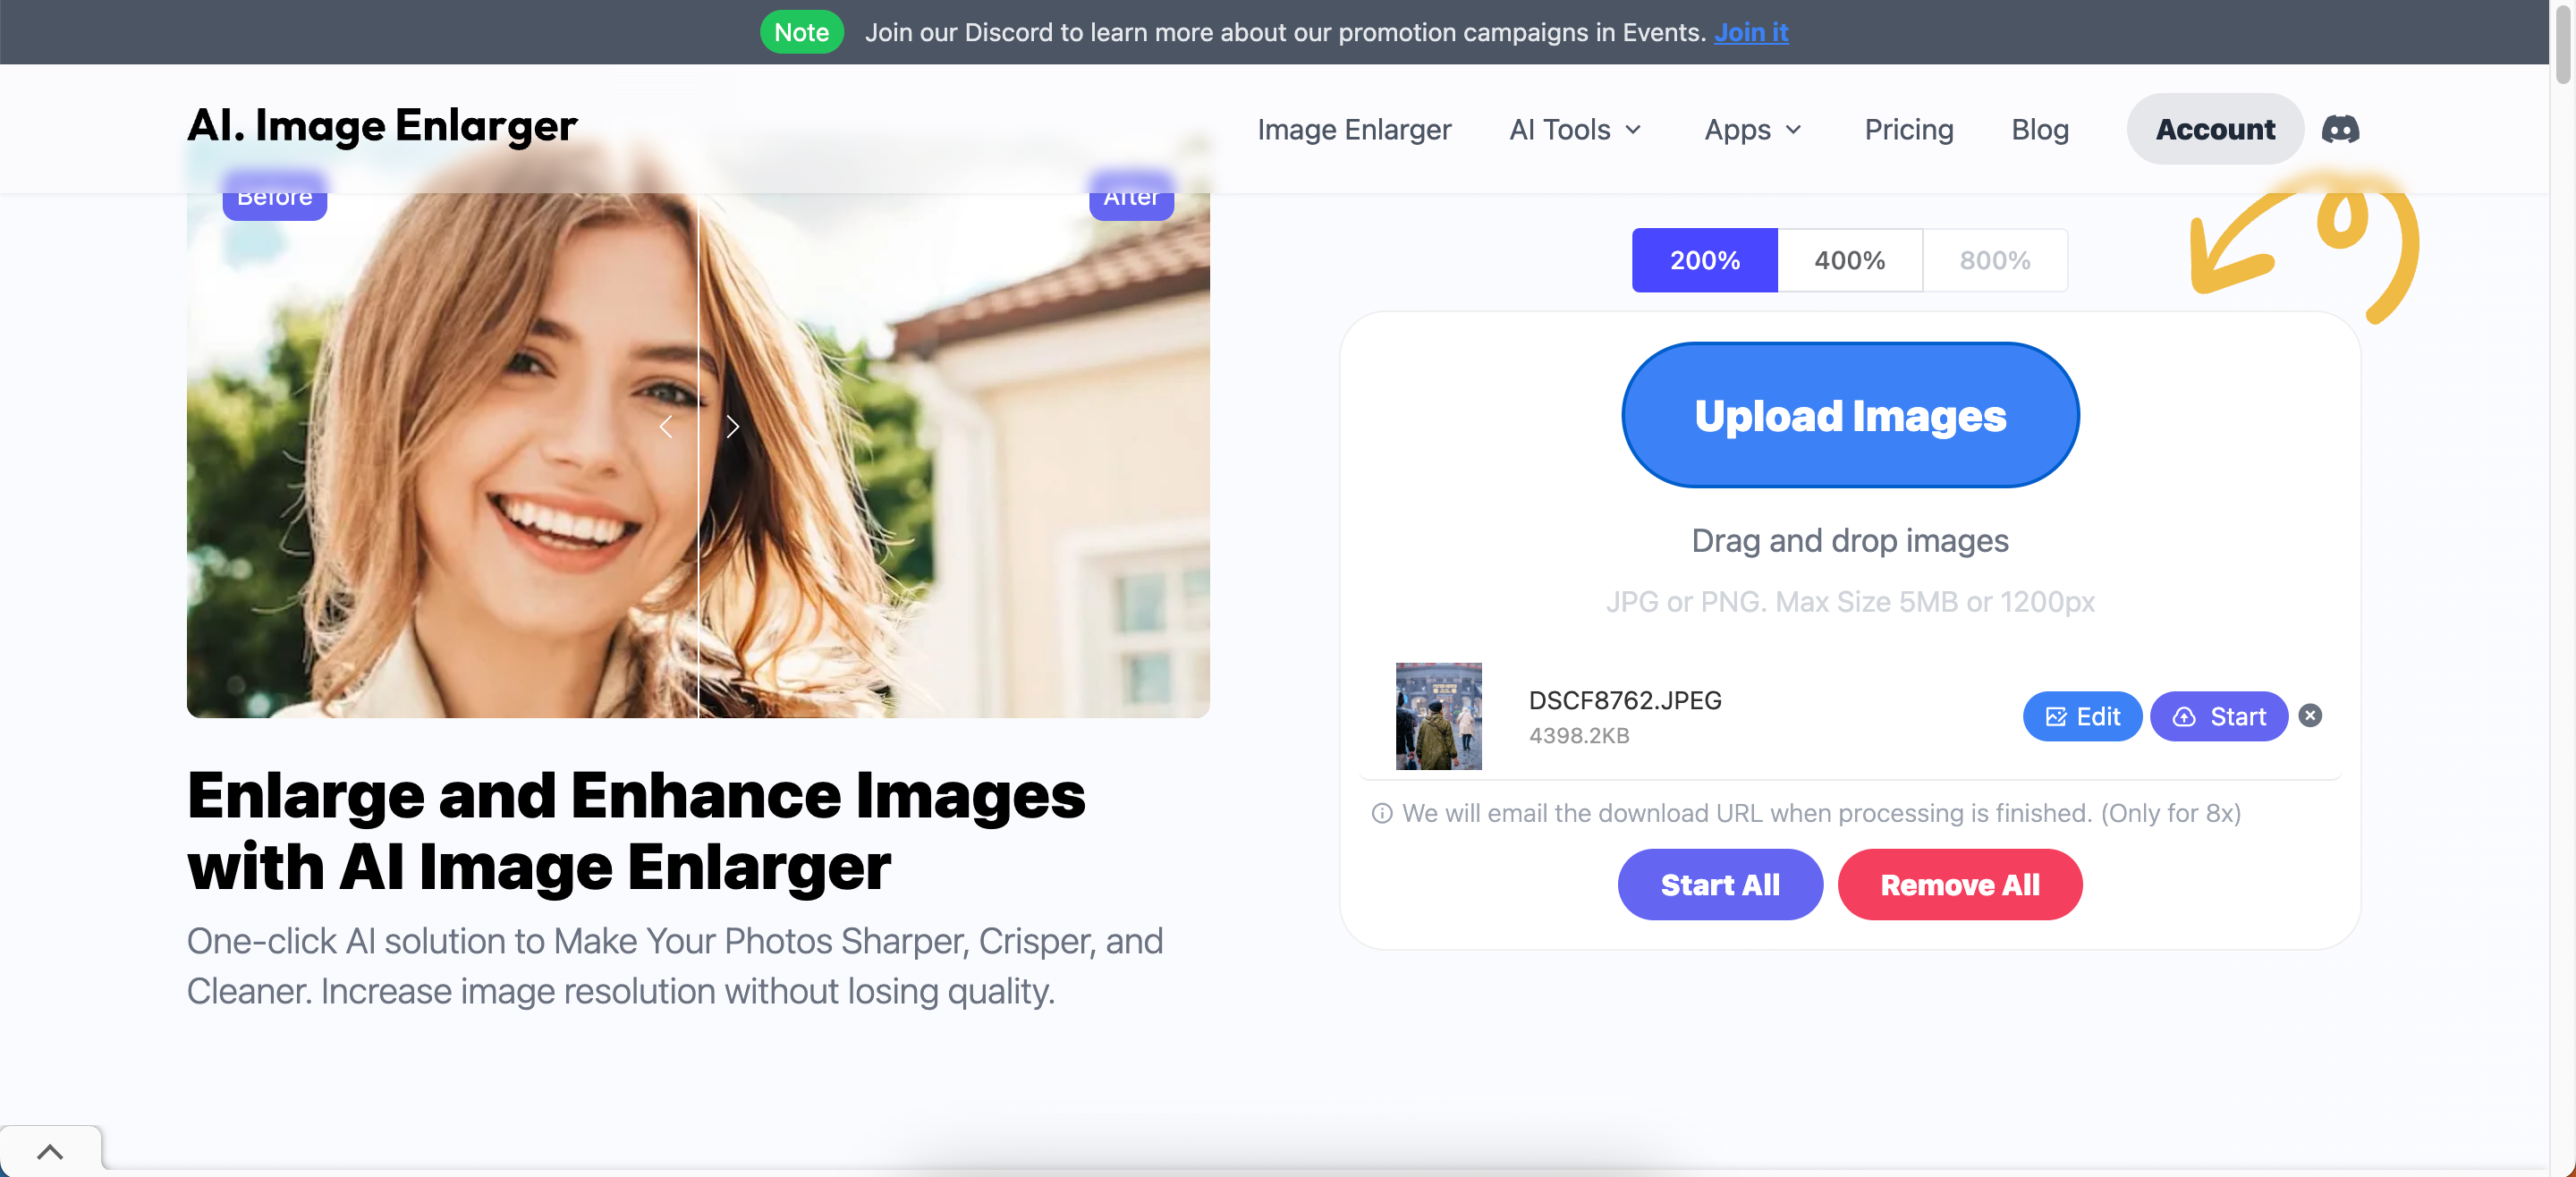 Start All button on the AI Image Enlarger website